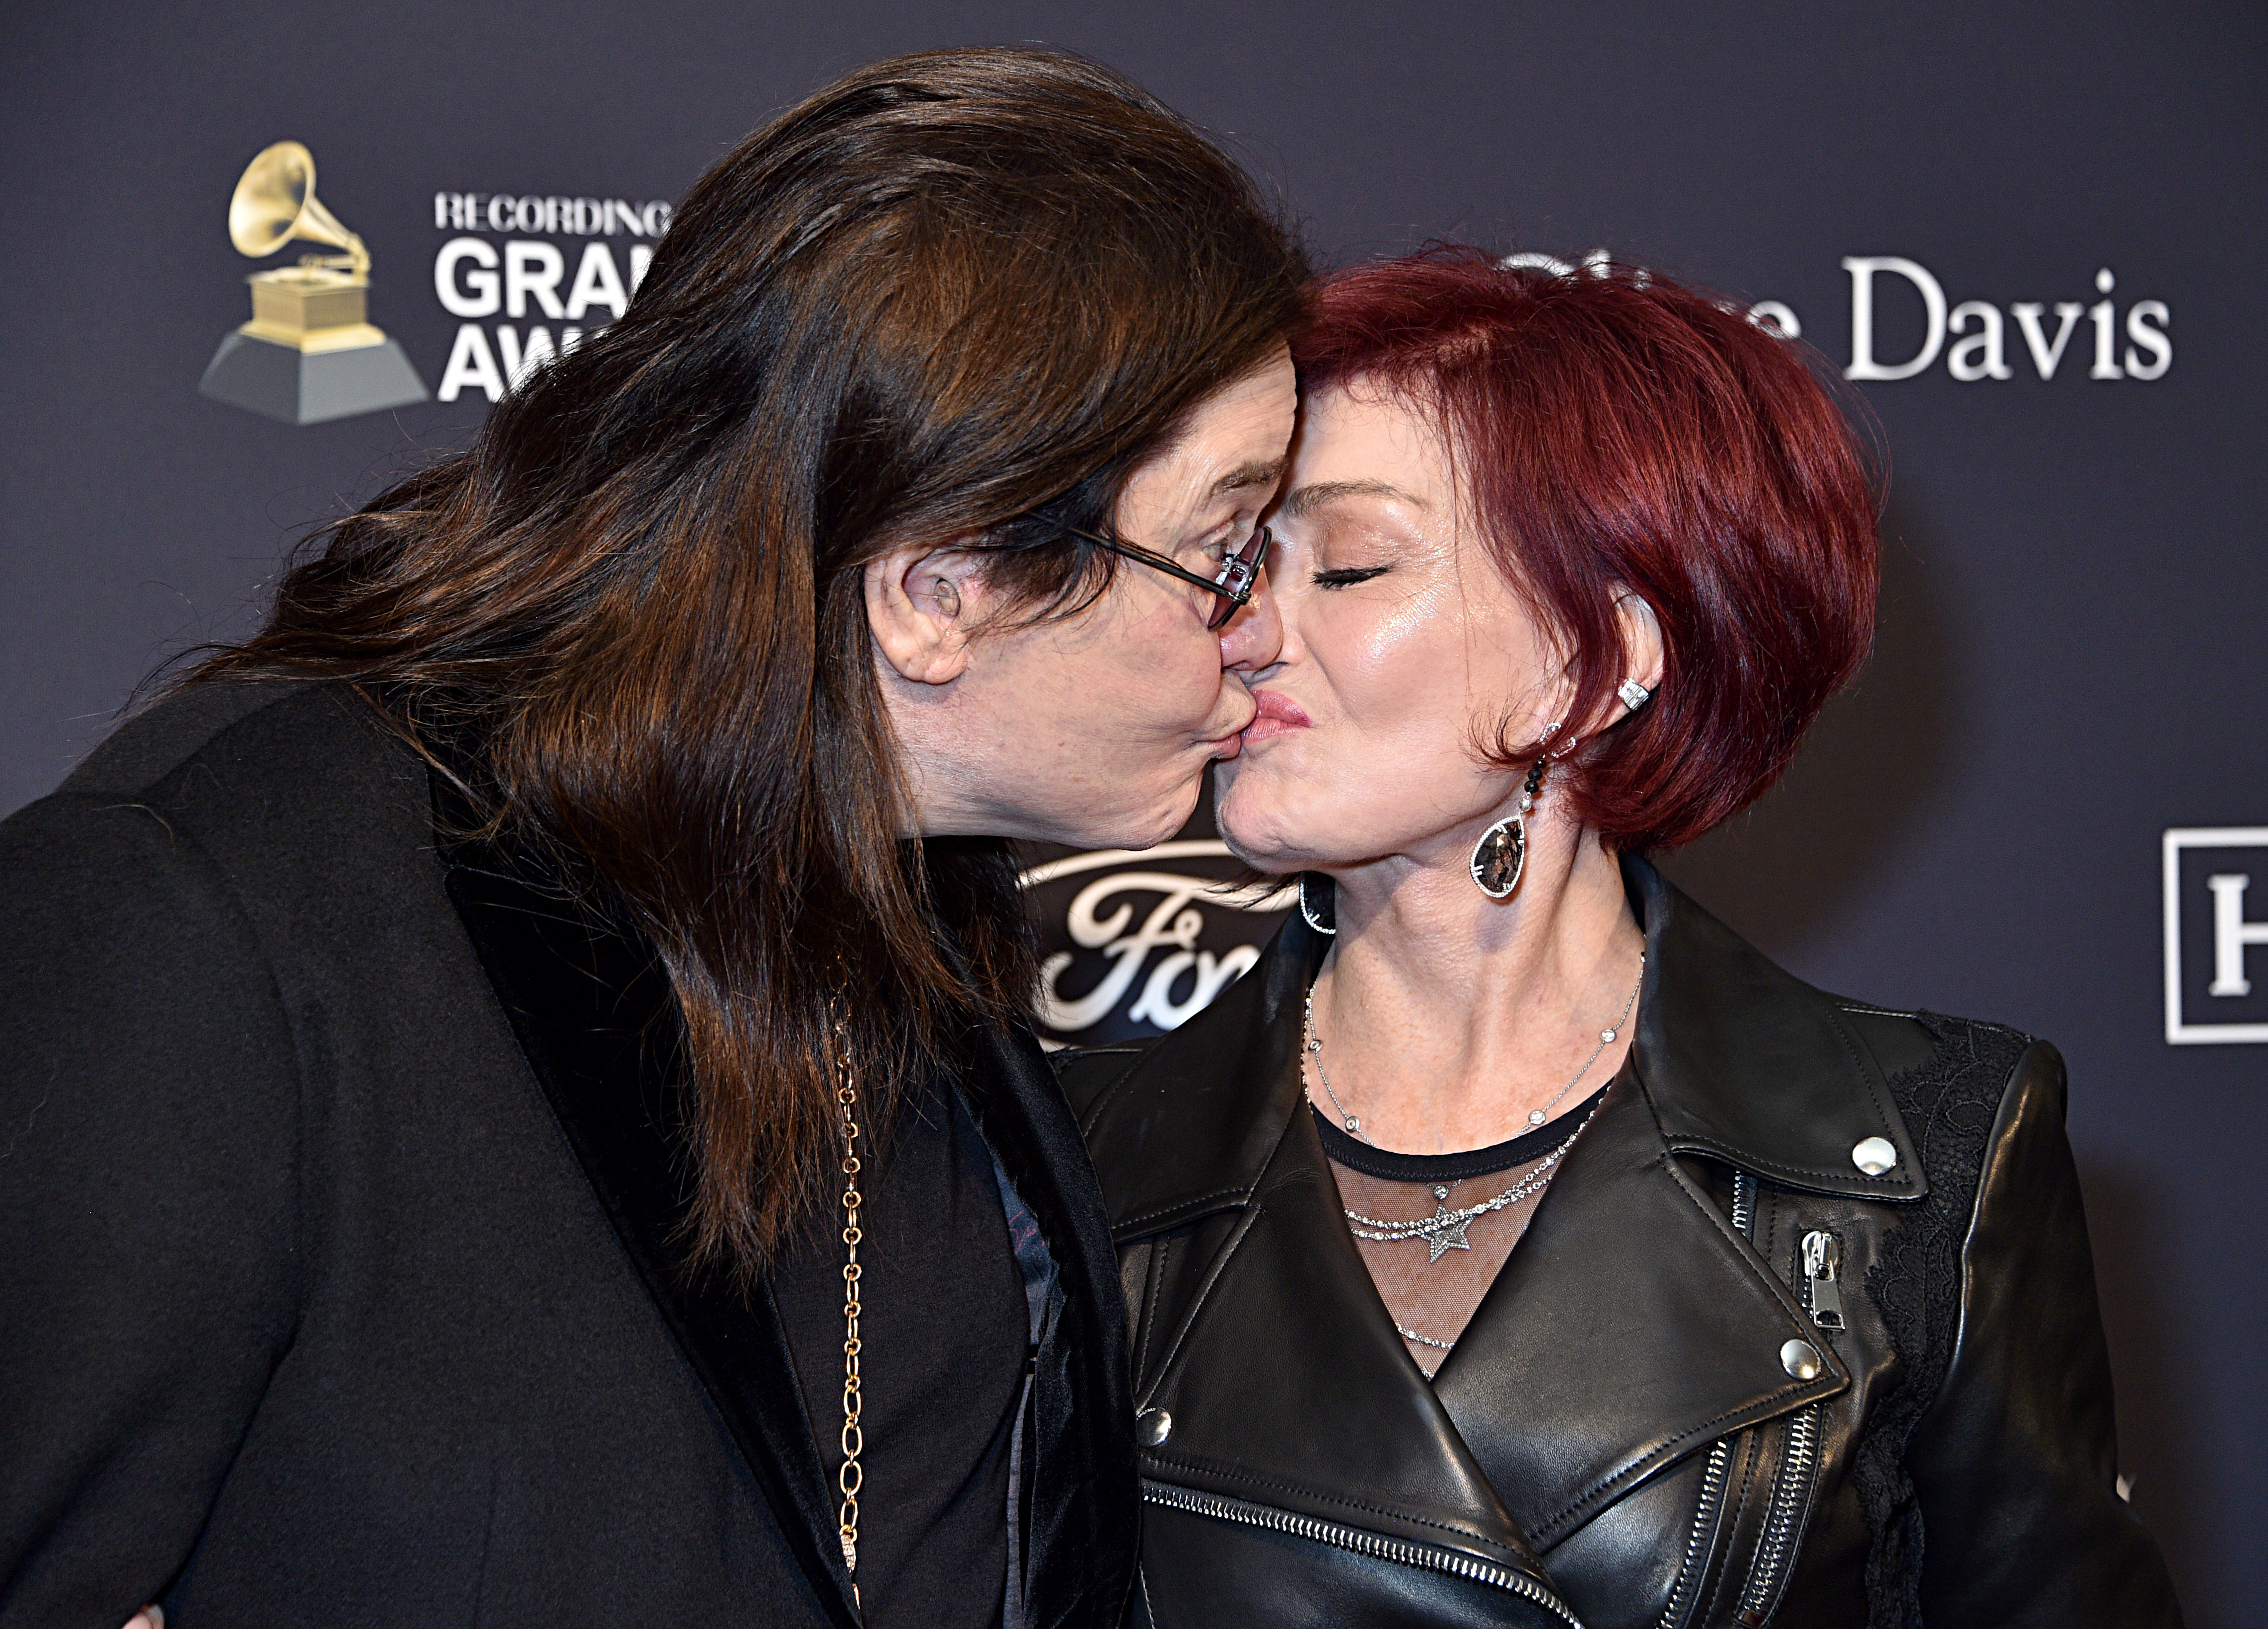 Ozzy Osbourne and Sharon Osbourne attend the Pre-Grammy Gala on January 25, 2020 in Beverly Hills, California. | Source: Getty Images